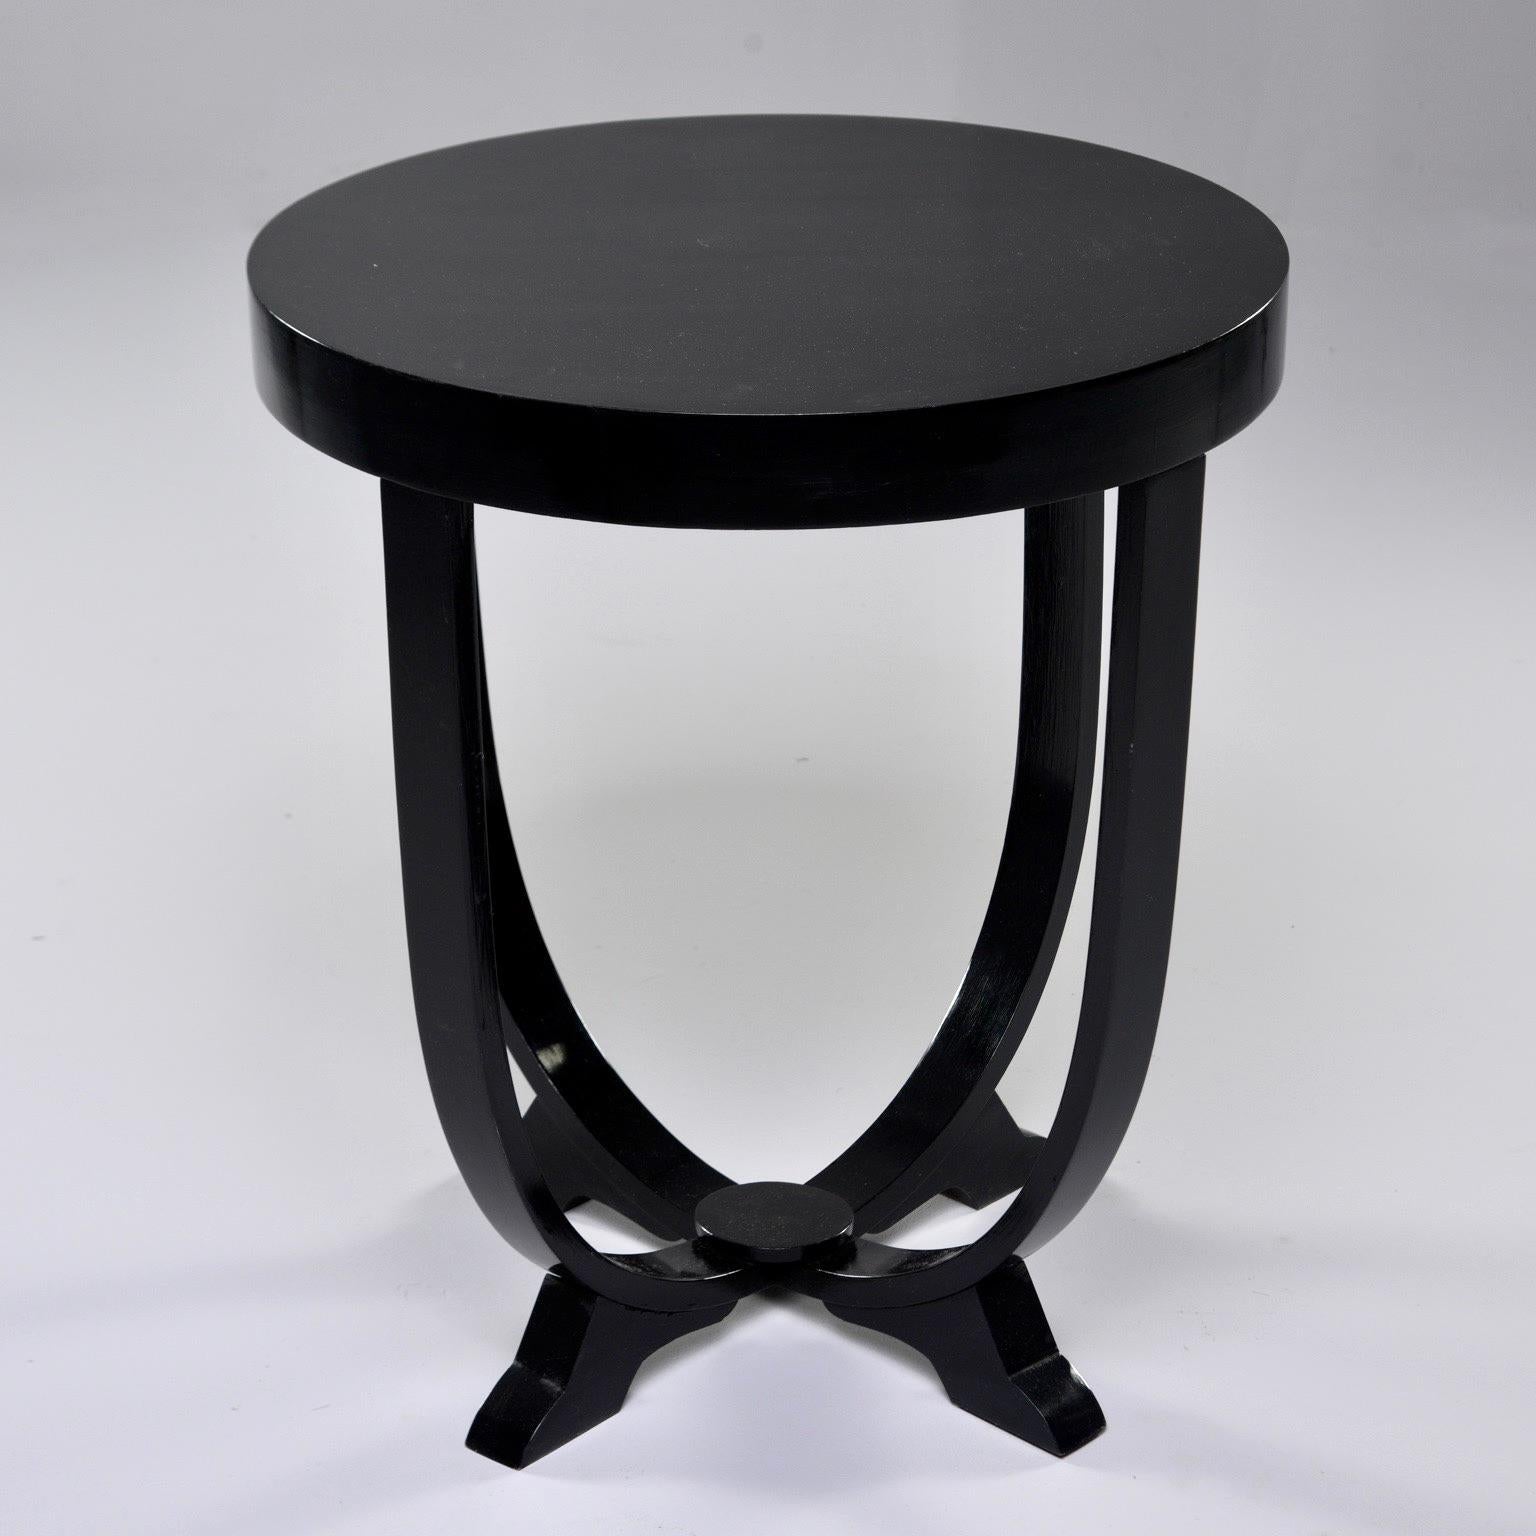 Italian Art Deco era side or center table features a round tabletop, four curved legs that join at a footed base, circa 1930s. New professionally applied ebonized finish. Unknown maker.